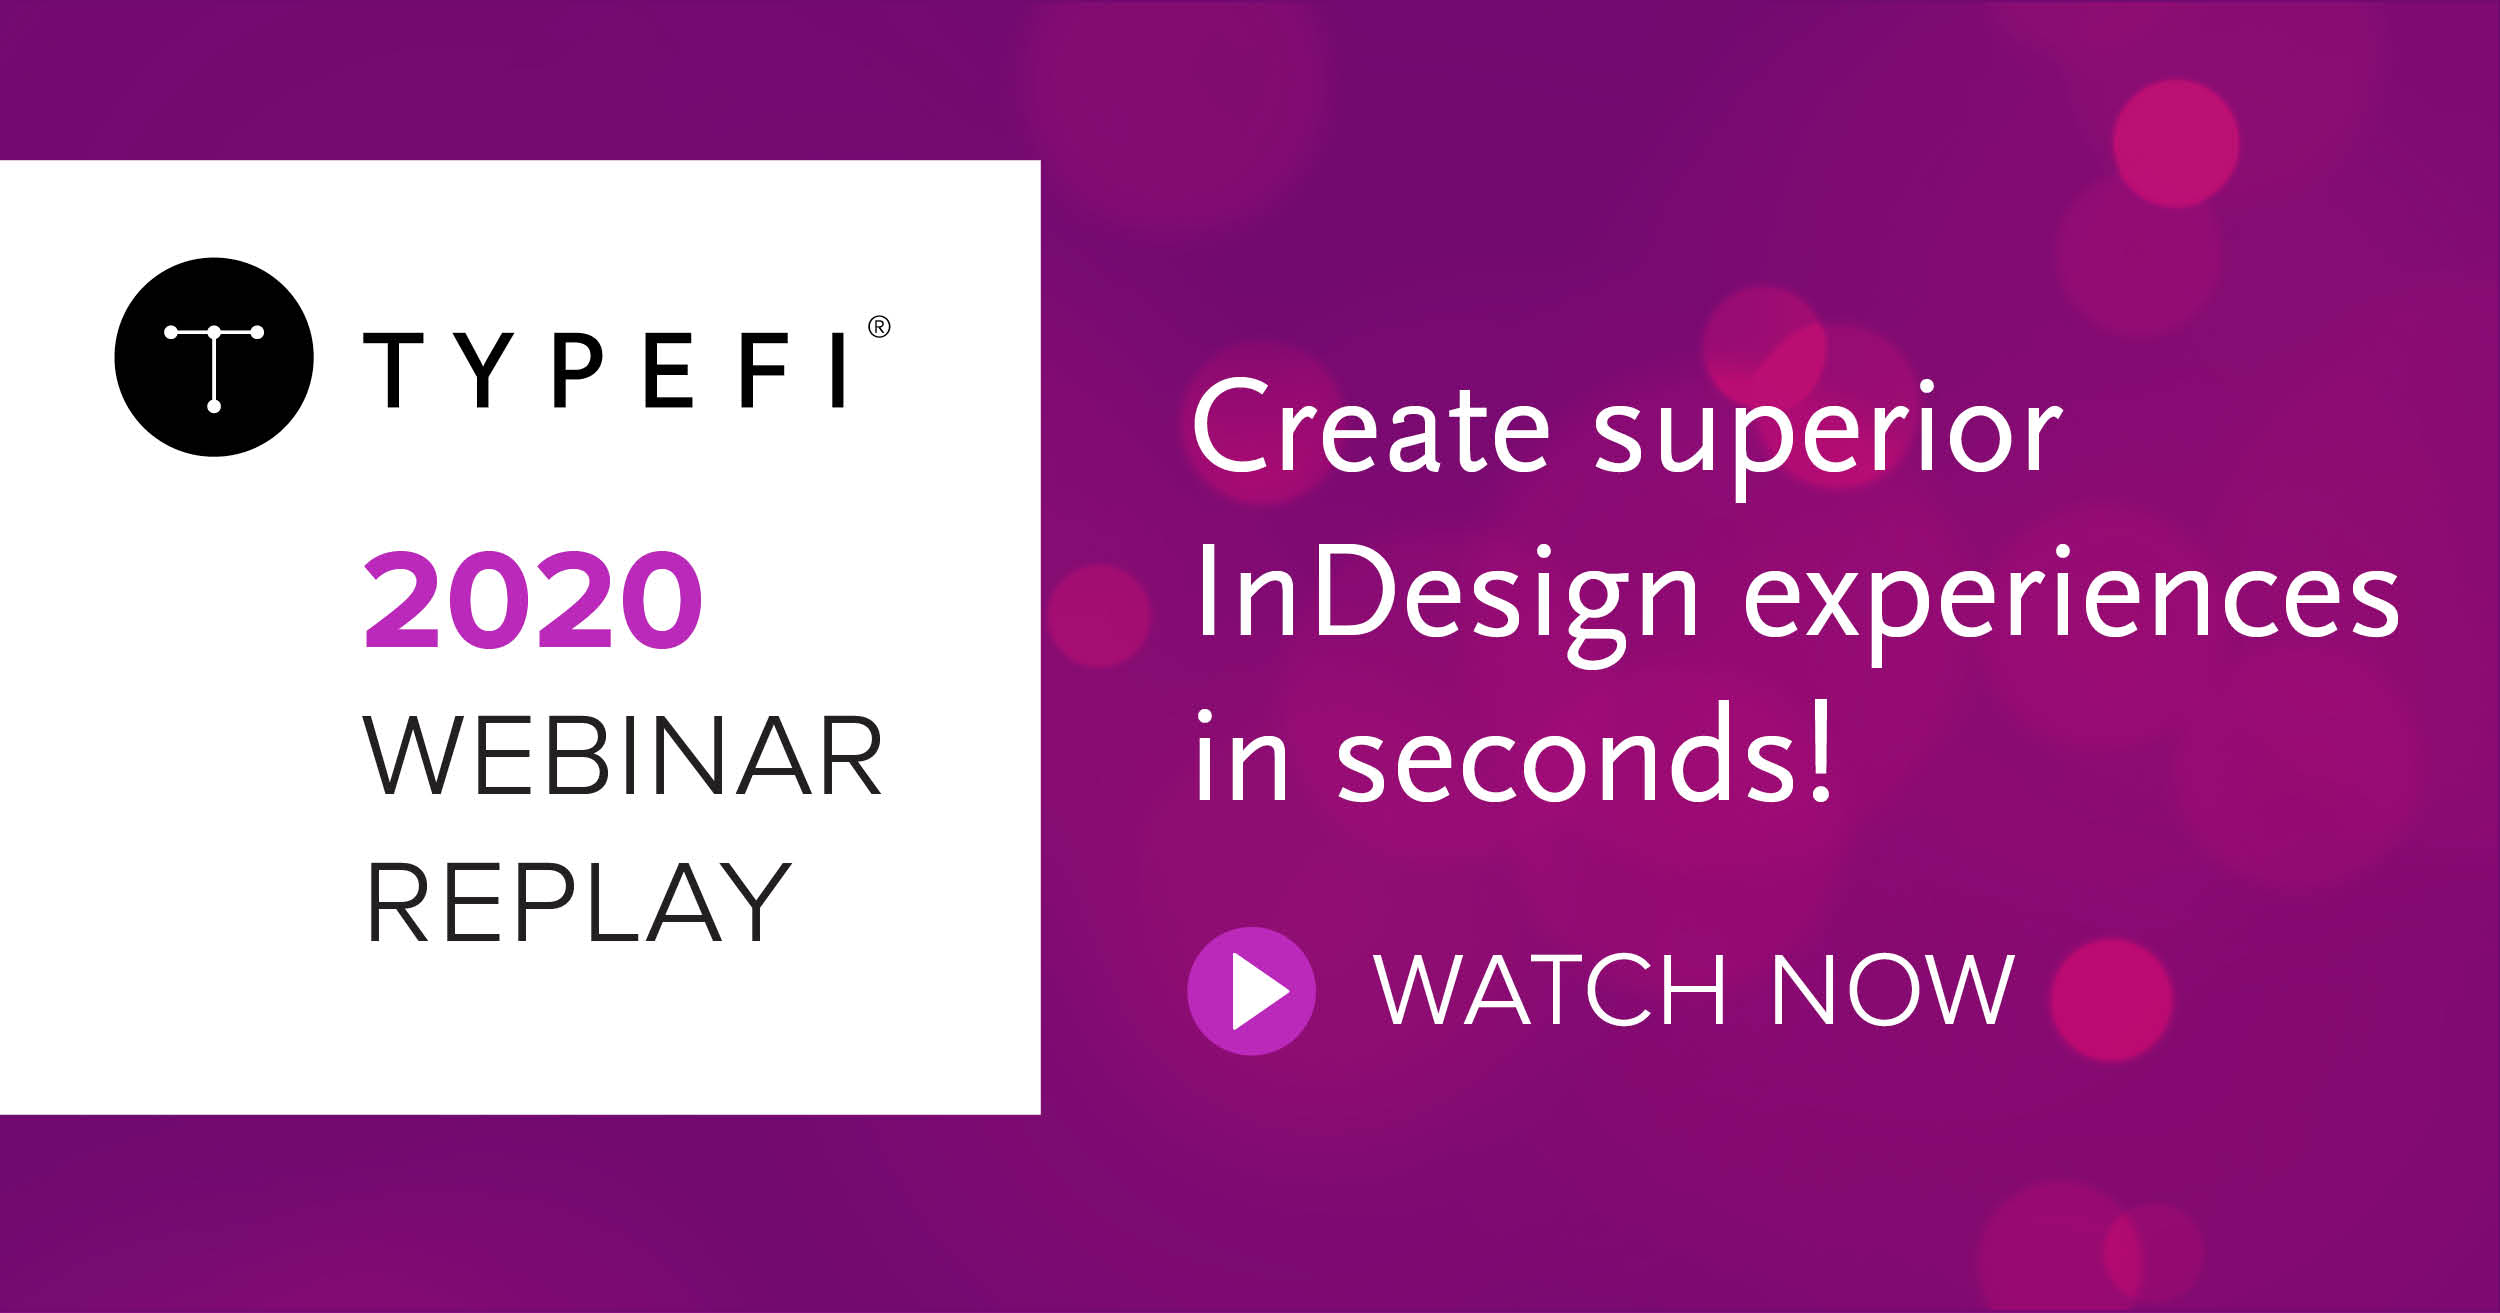 A promotional graphic for the webinar 'Create superior InDesign experiences in seconds!'